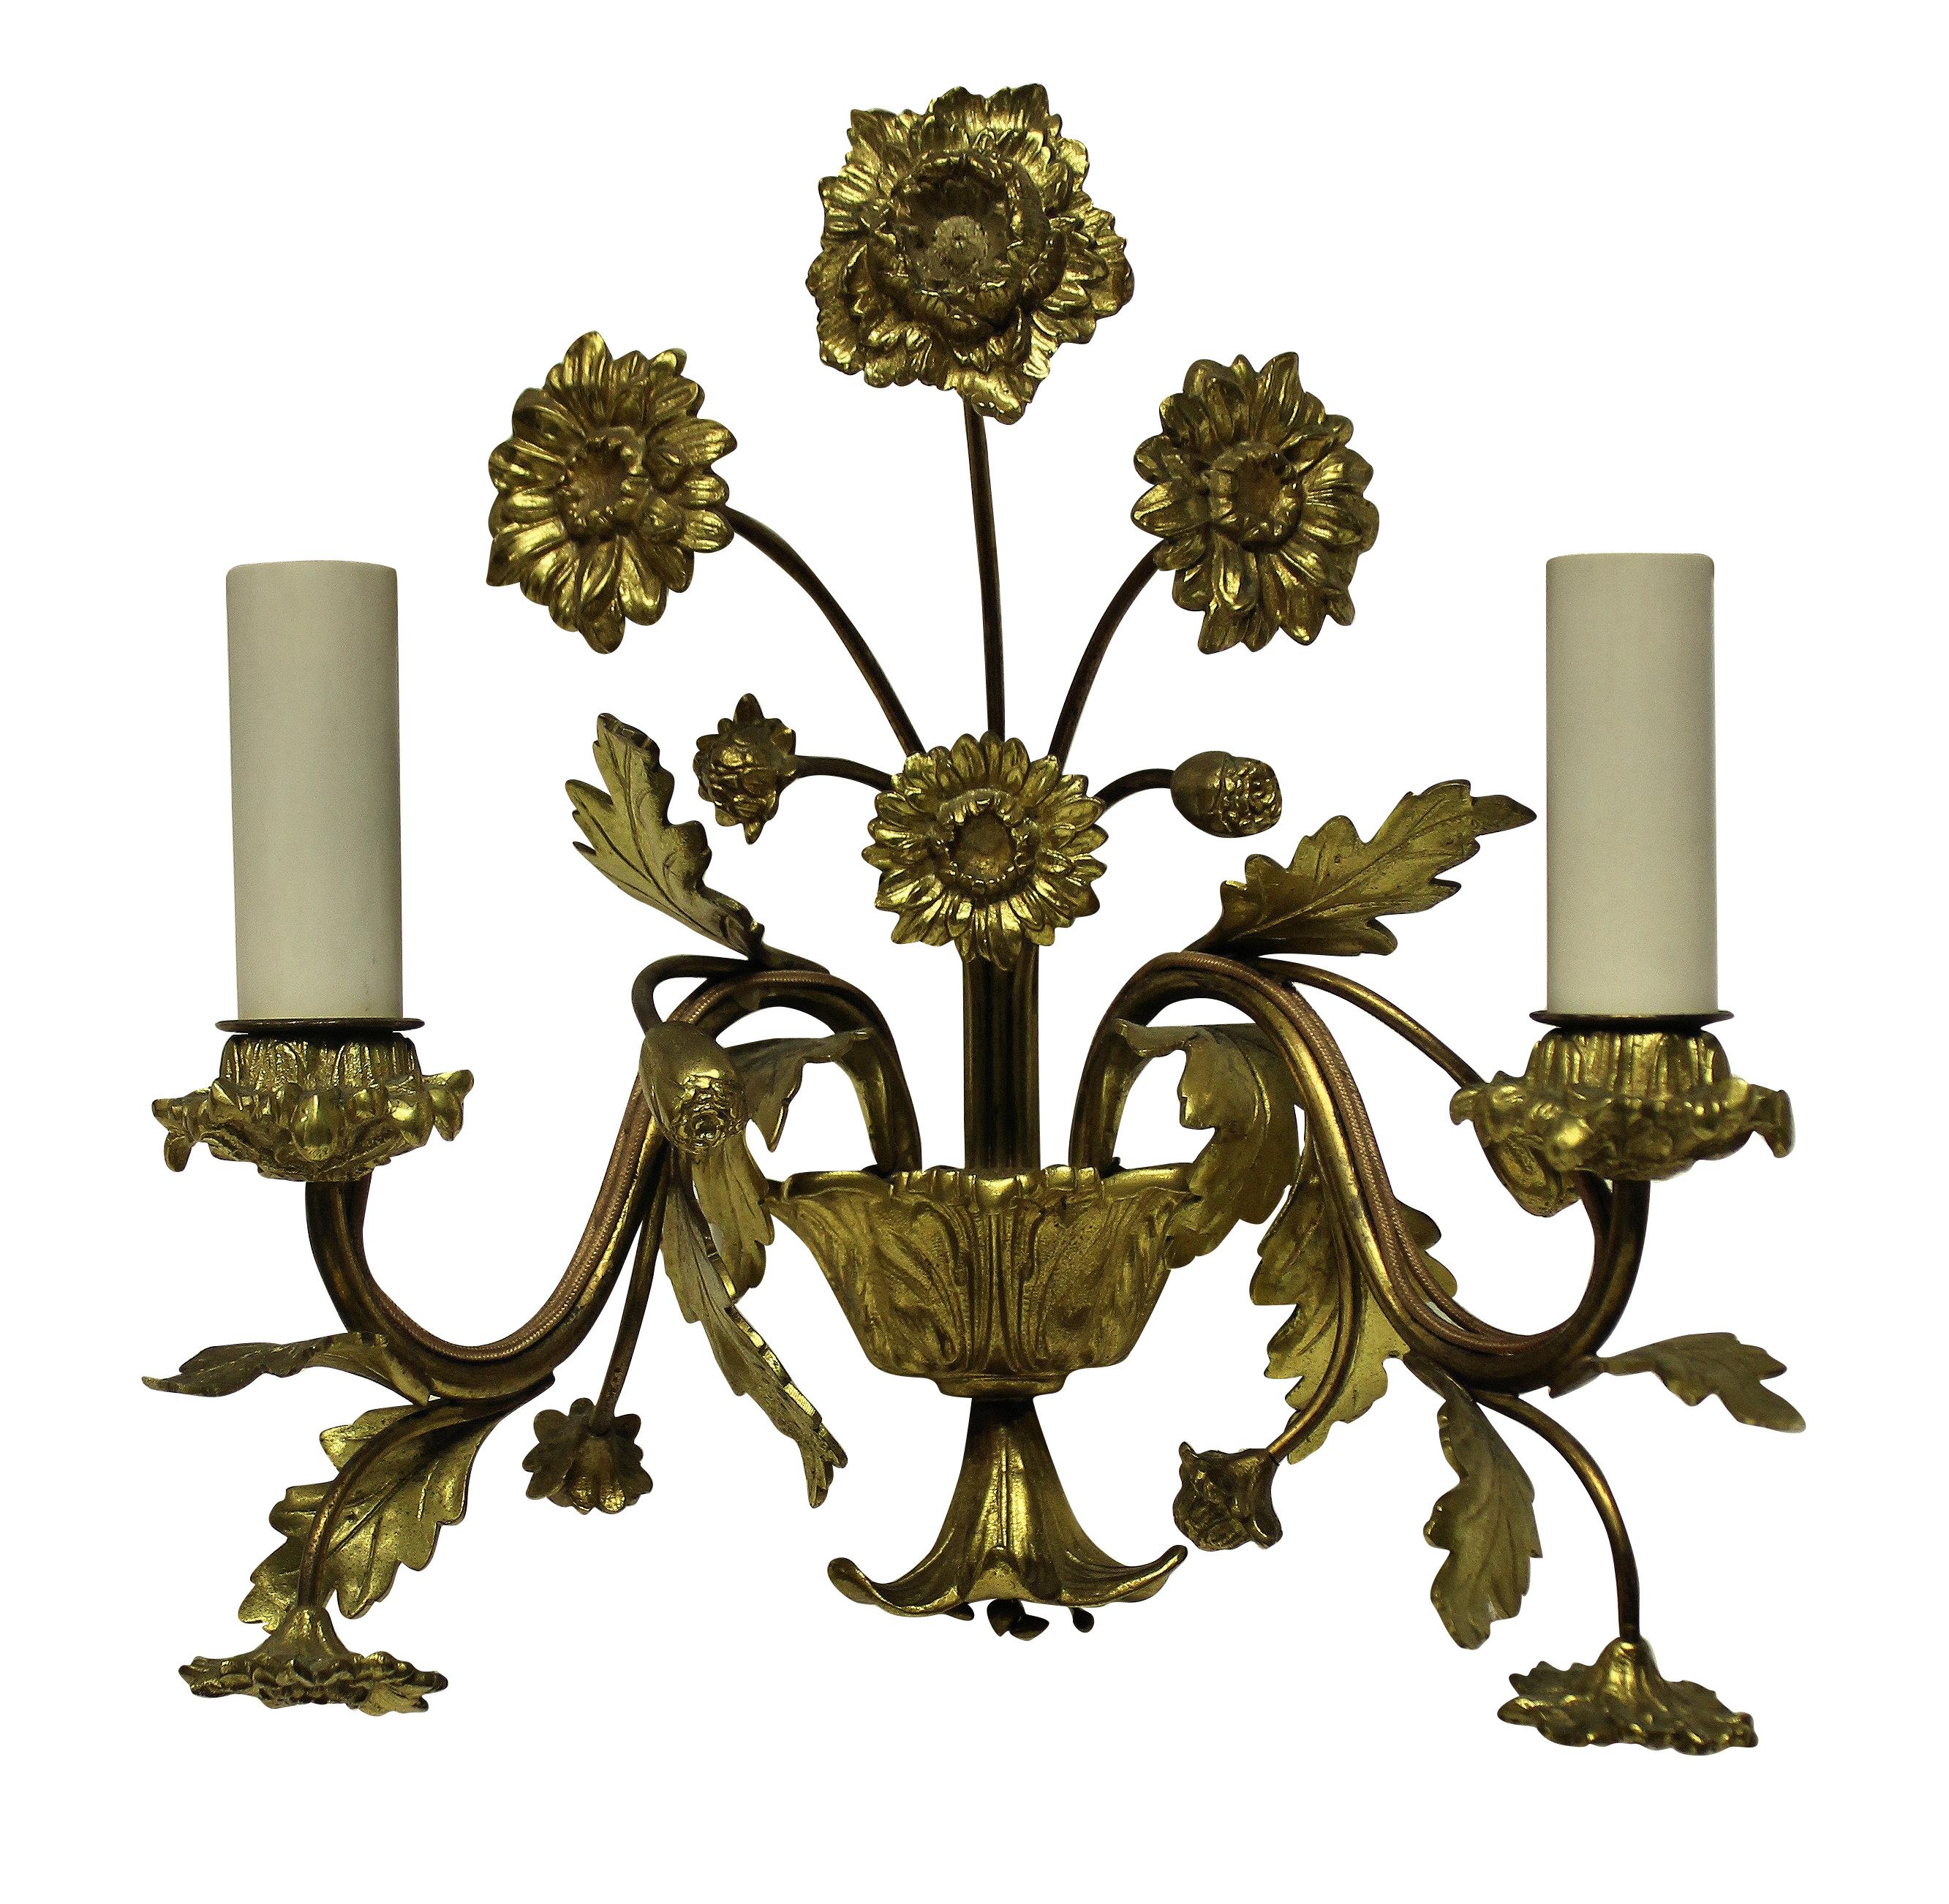 A set of four French gilt bronze wall sconces depicting flowers.